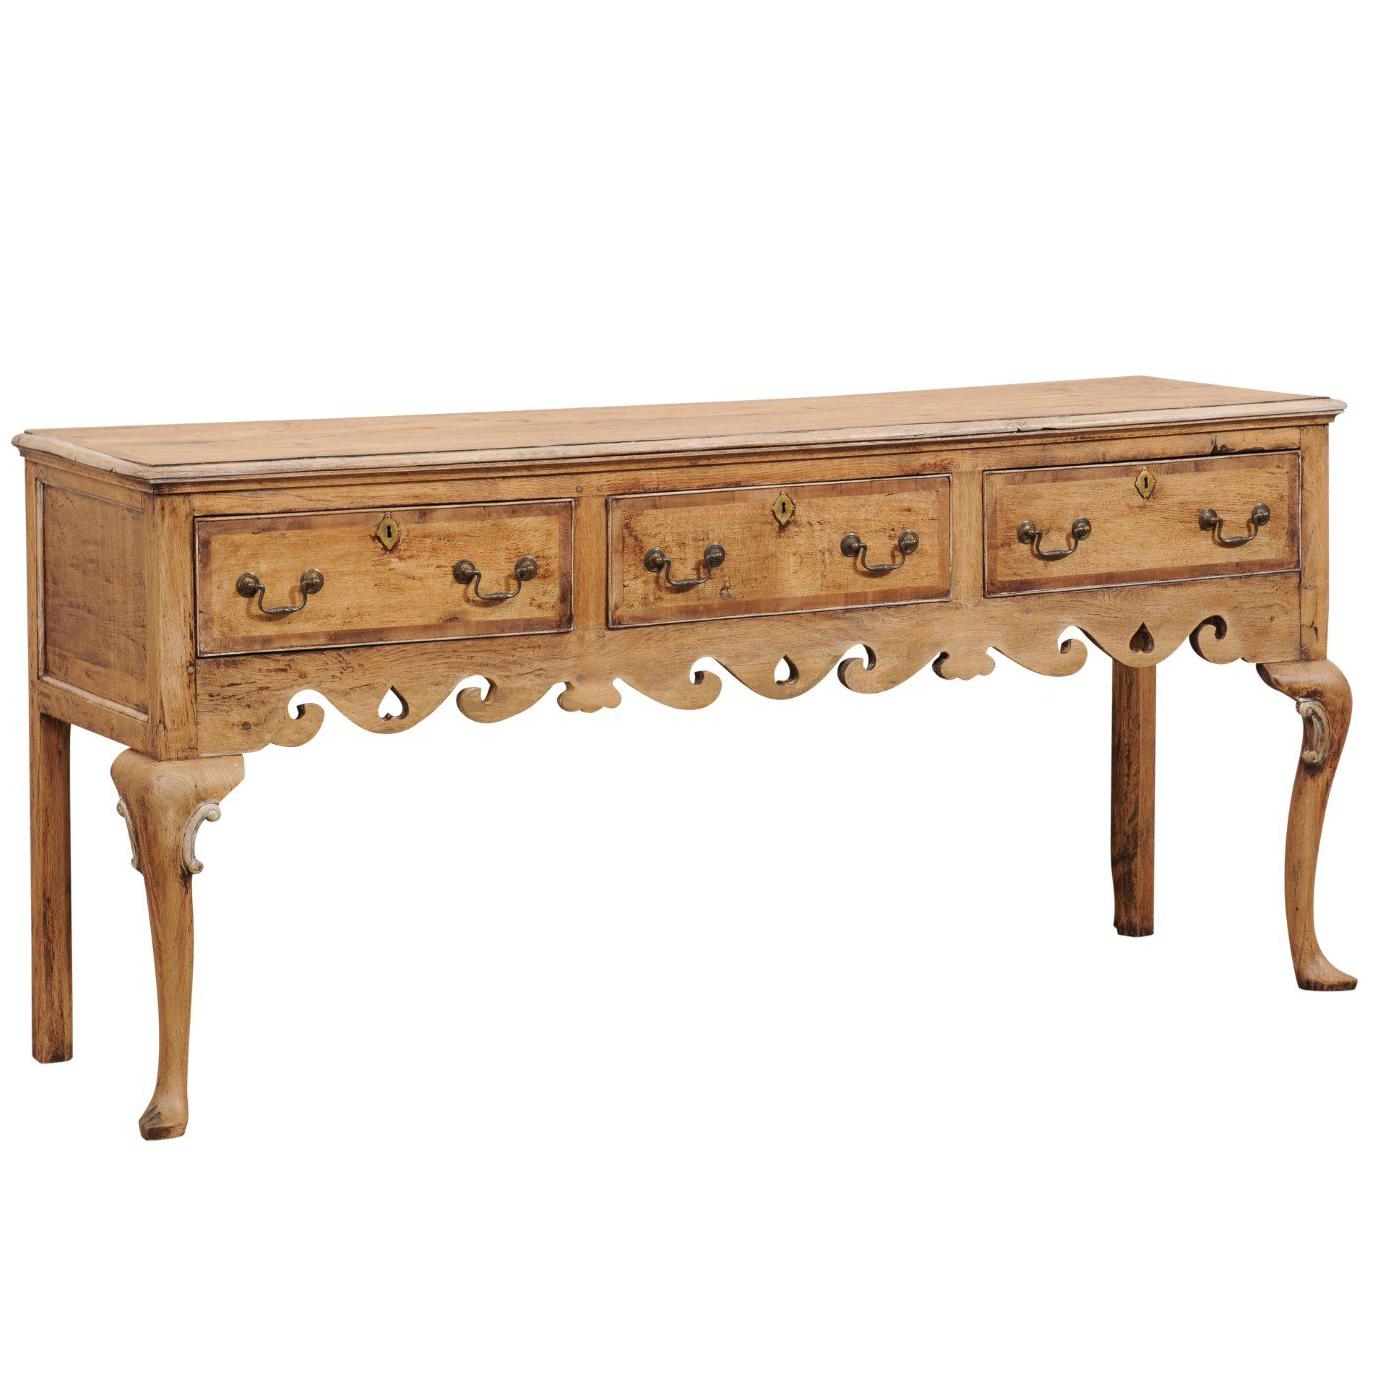 English 19th Century Queen Anne Wood Console Table with Drawers